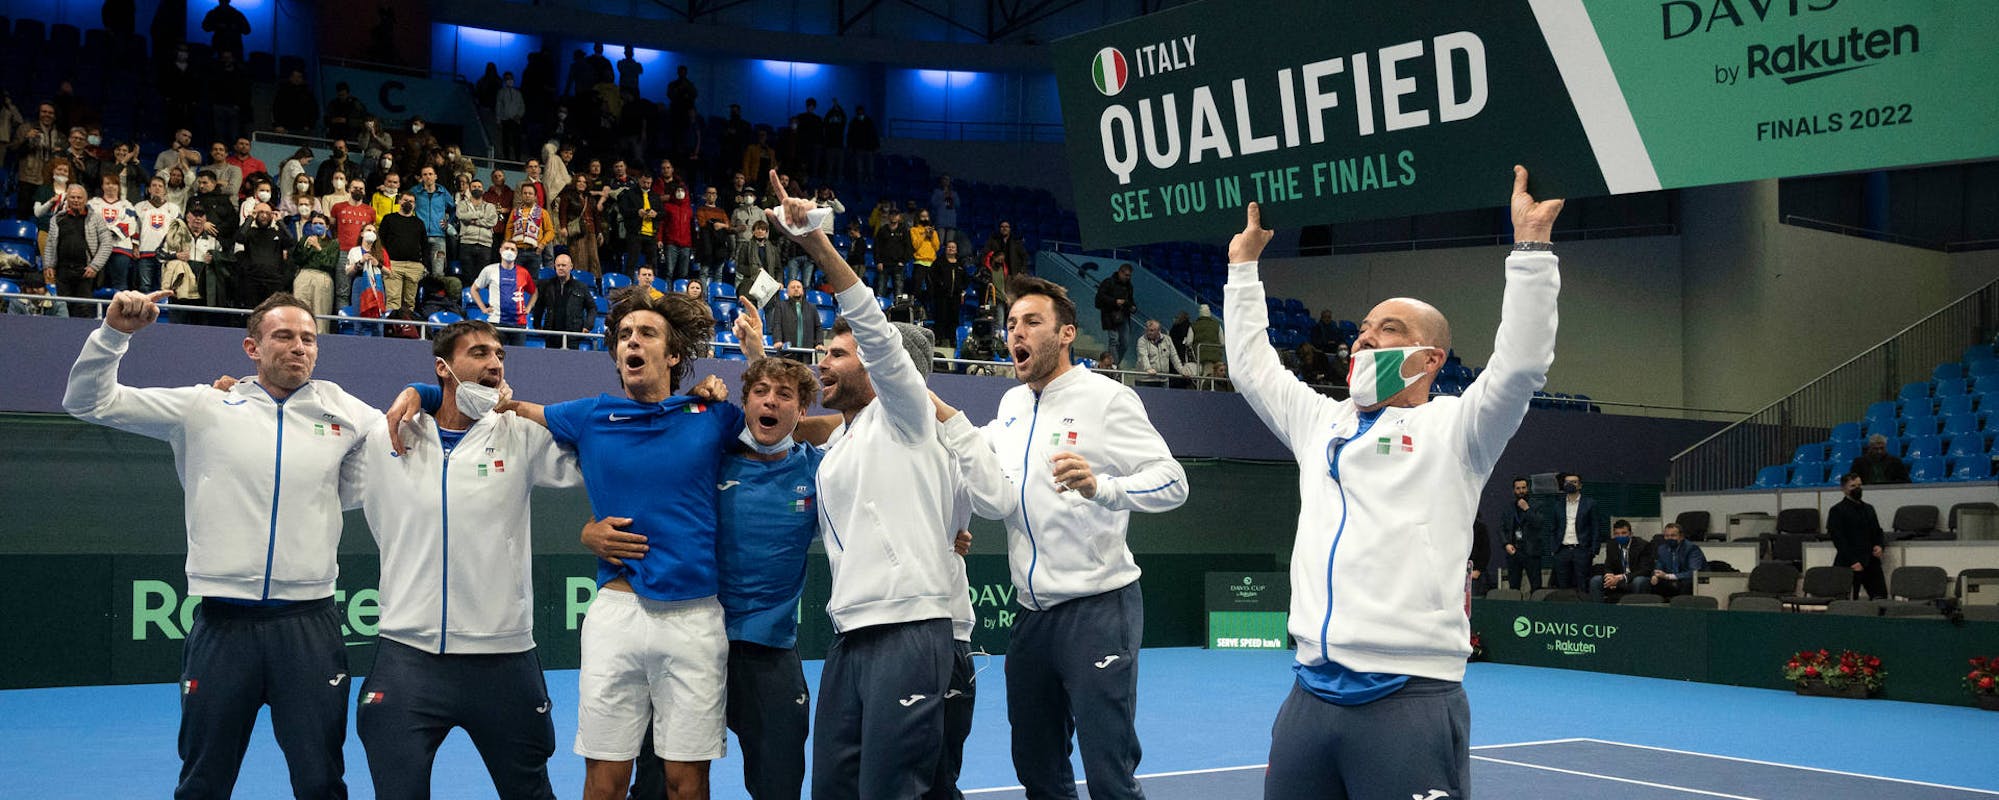 Italy celebrate their 2022 Qualifiers win over Slovakia